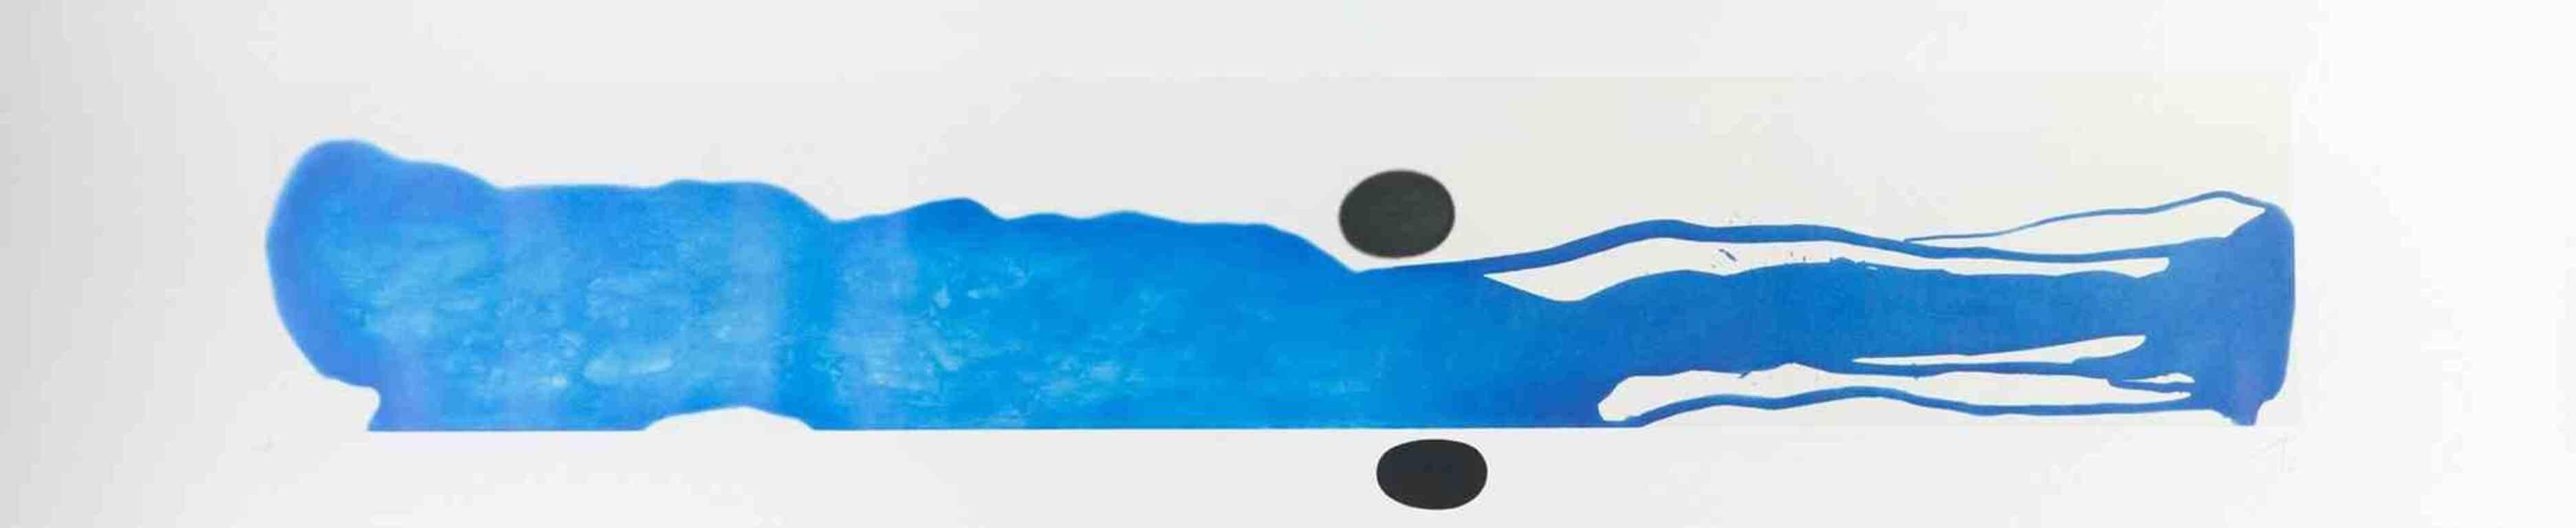 The Blue Between is a print realized in 1978 by Victor Pasmore (Chelsham, 1908 - Gudia, 1998).

Etching and aquatint print.

Initials and date lower right, edition and embossed stamp "2RC", Rome, lower left.

The artwork is realized delicately